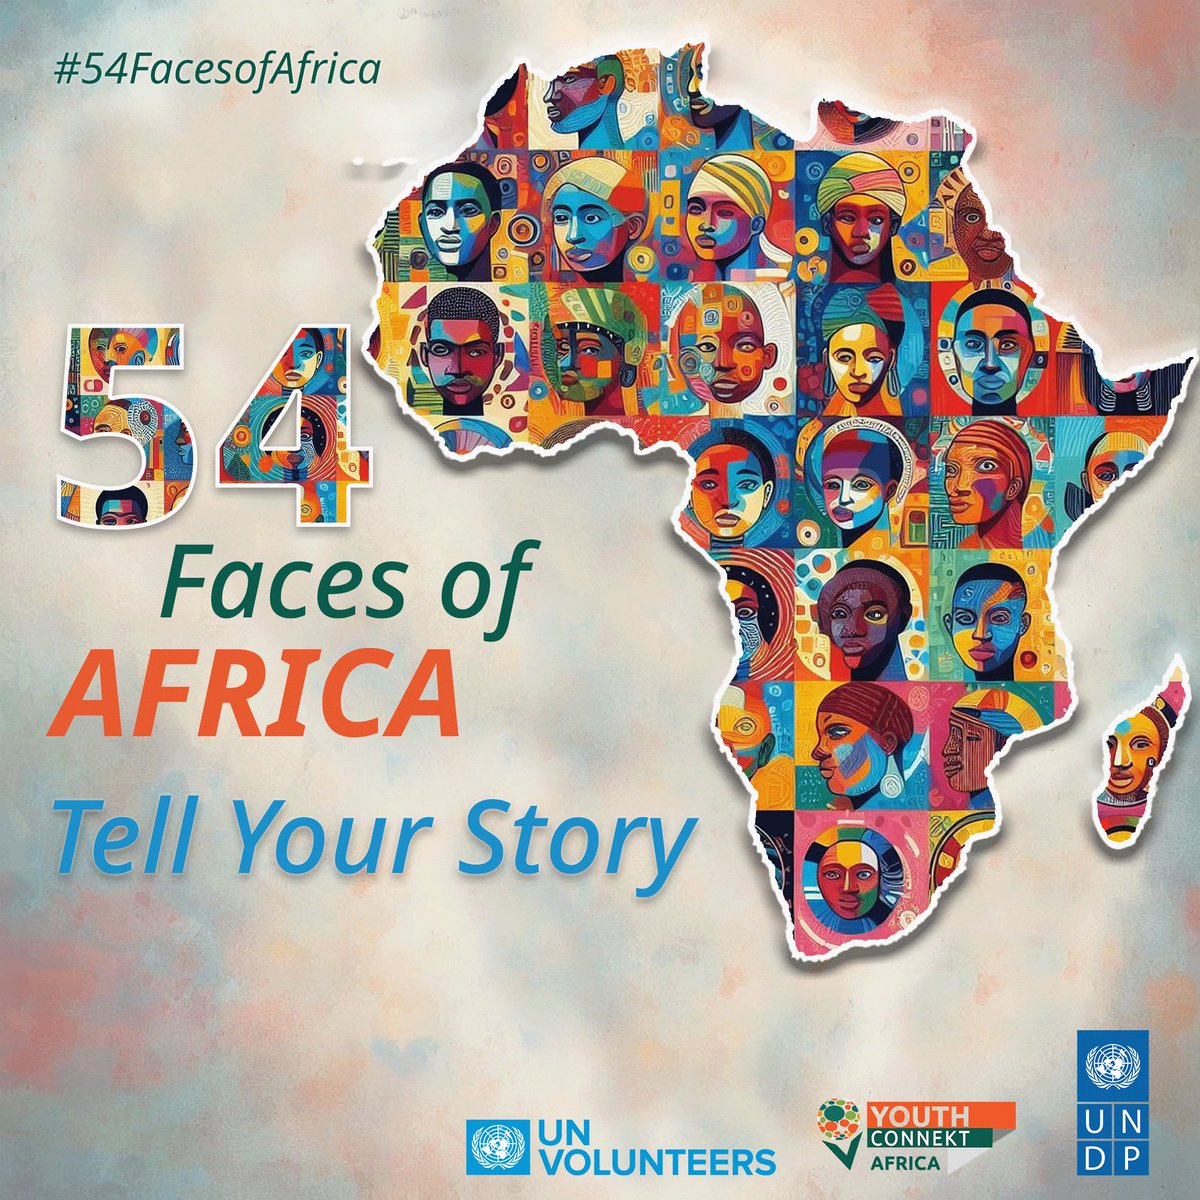 📢 Last day to apply! 

Are you an African youth aged 18-35? Join the #54FacesofAfrica campaign!     

Share your unique story on 'What it means to be African”, either as a photo, video or 500-word article, via 54facesaafrica@gmail.com by 7 Dec.